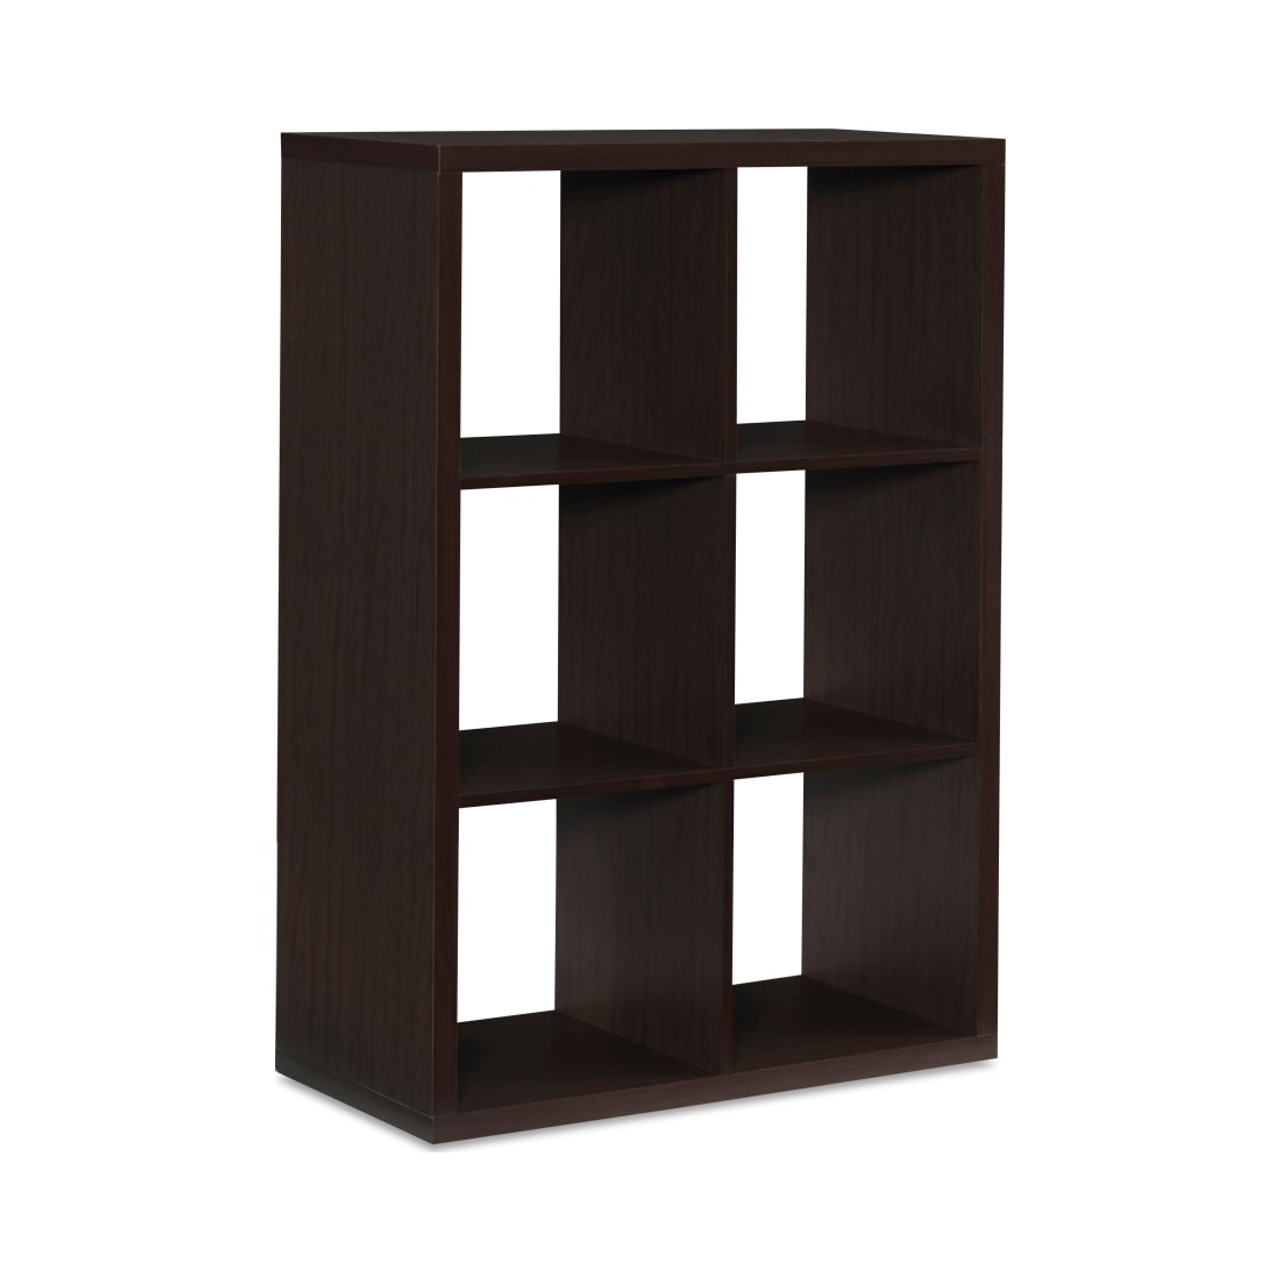 Kinne Collection Espresso 6 Cubby Storage Cabinet